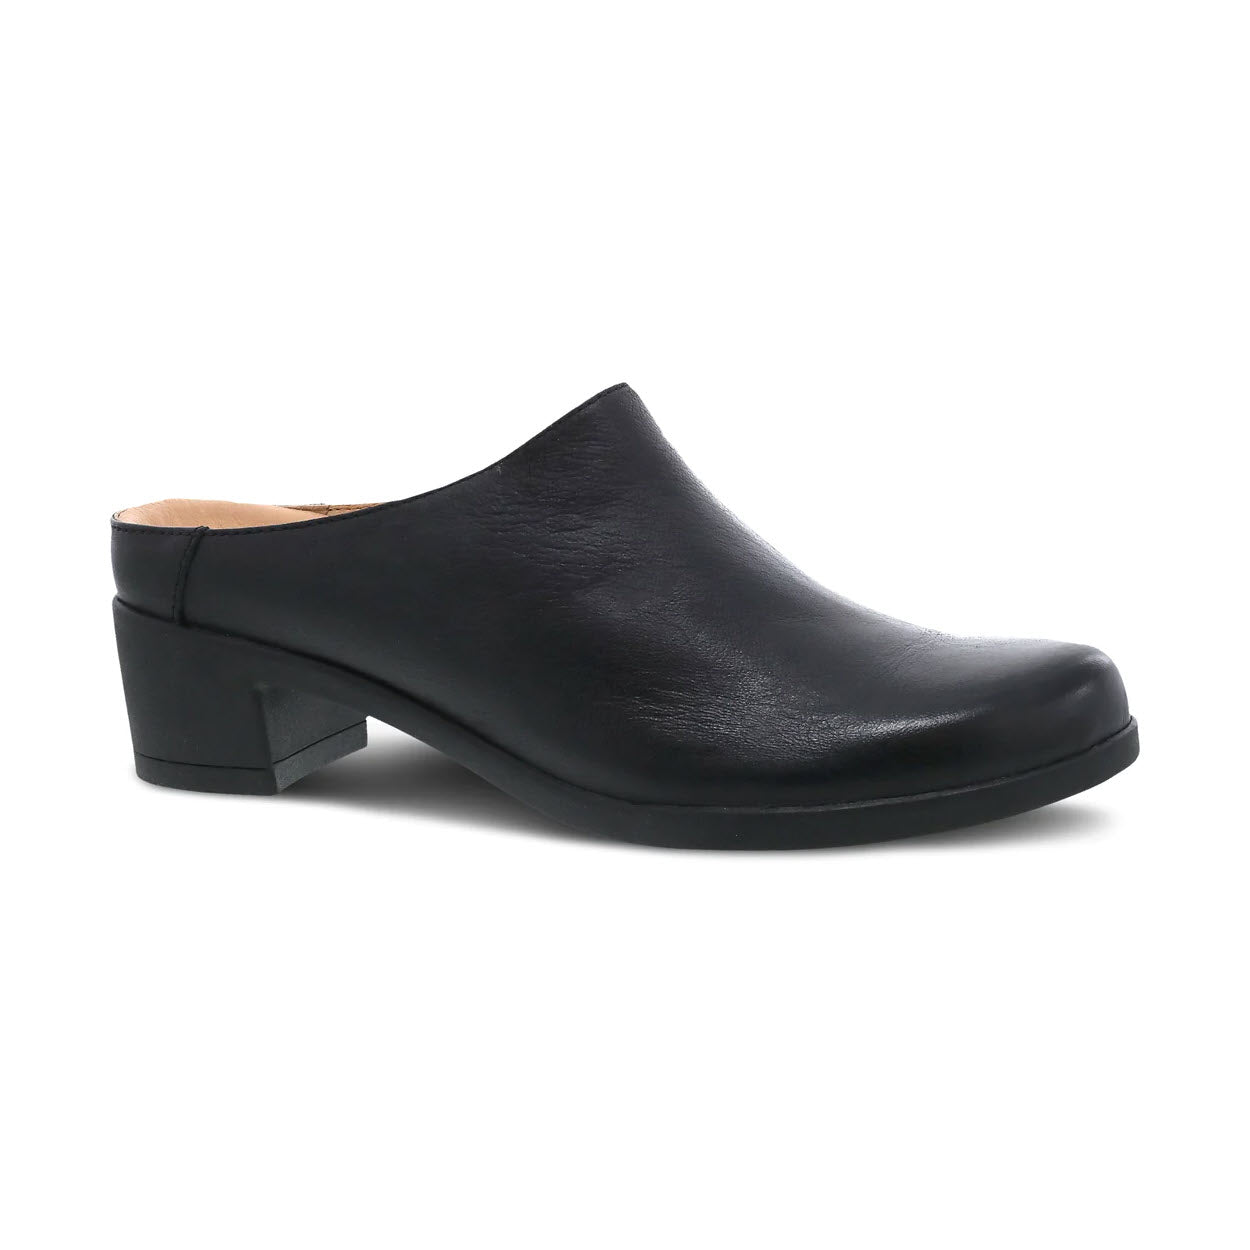 A single Dansko Carrie Black Burnished backless mule shoe with a low heel, displayed against a white background.